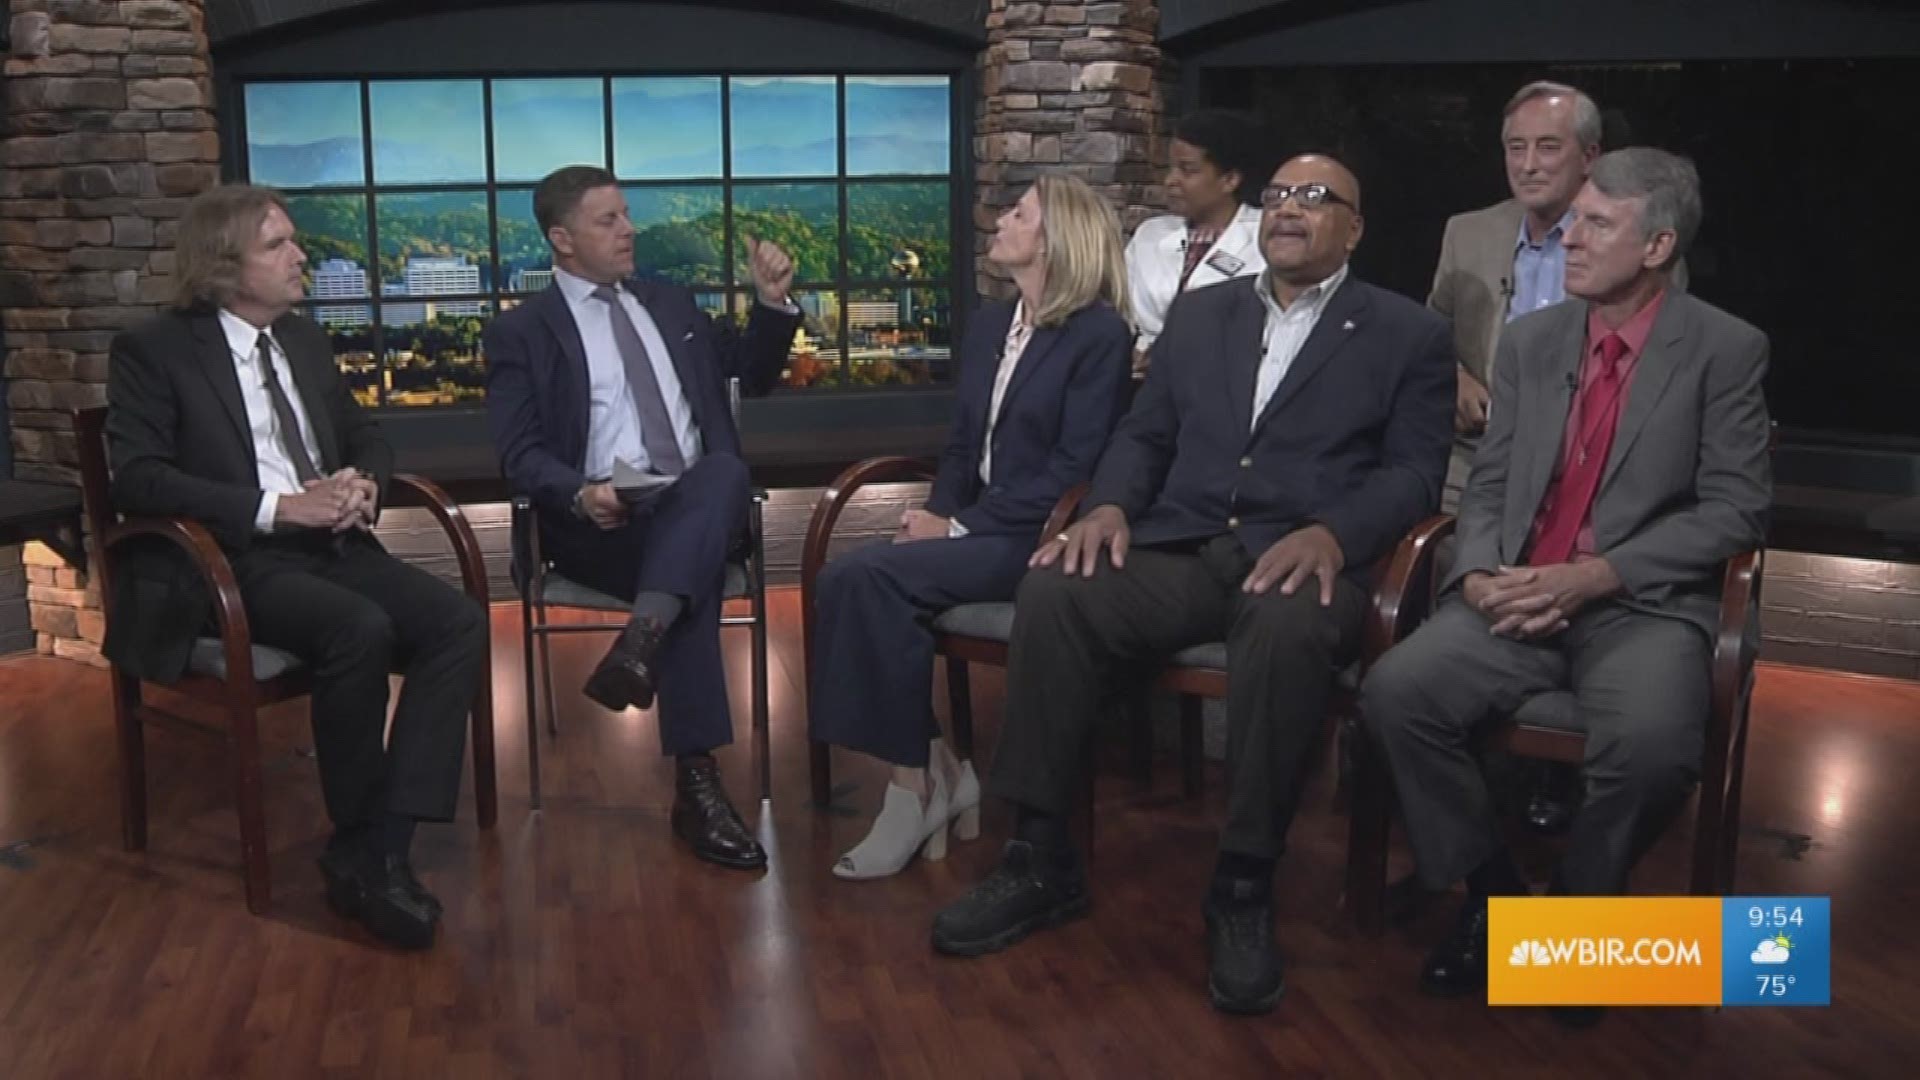 Knoxville City Council At-large C candidates Amy Midis, Hubert Smith, David Williams, Amelia Parker and Bob Thomas talk about their positions in the race.